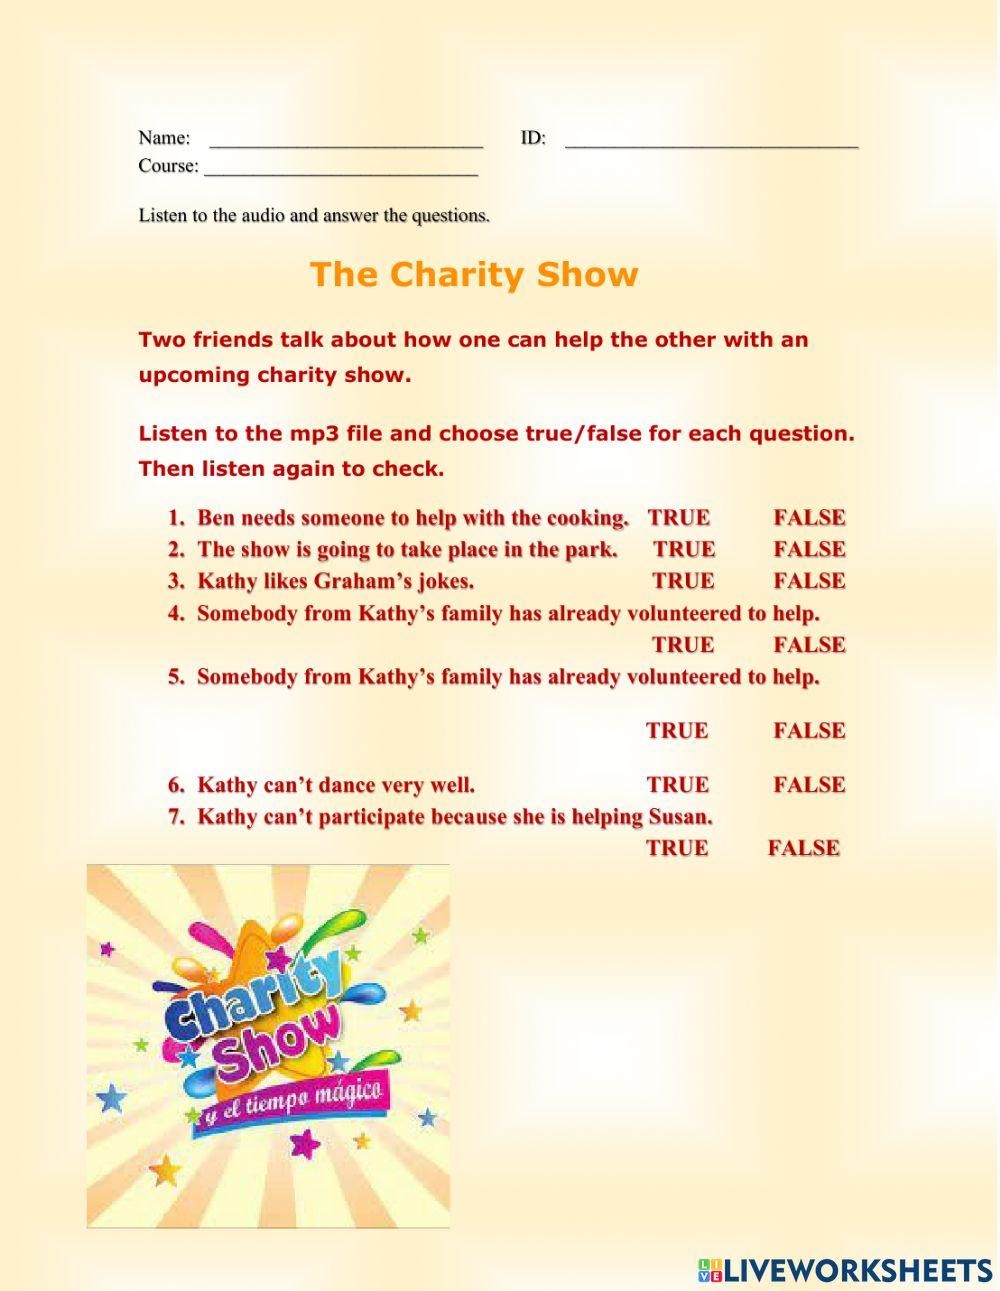 The Charity Show